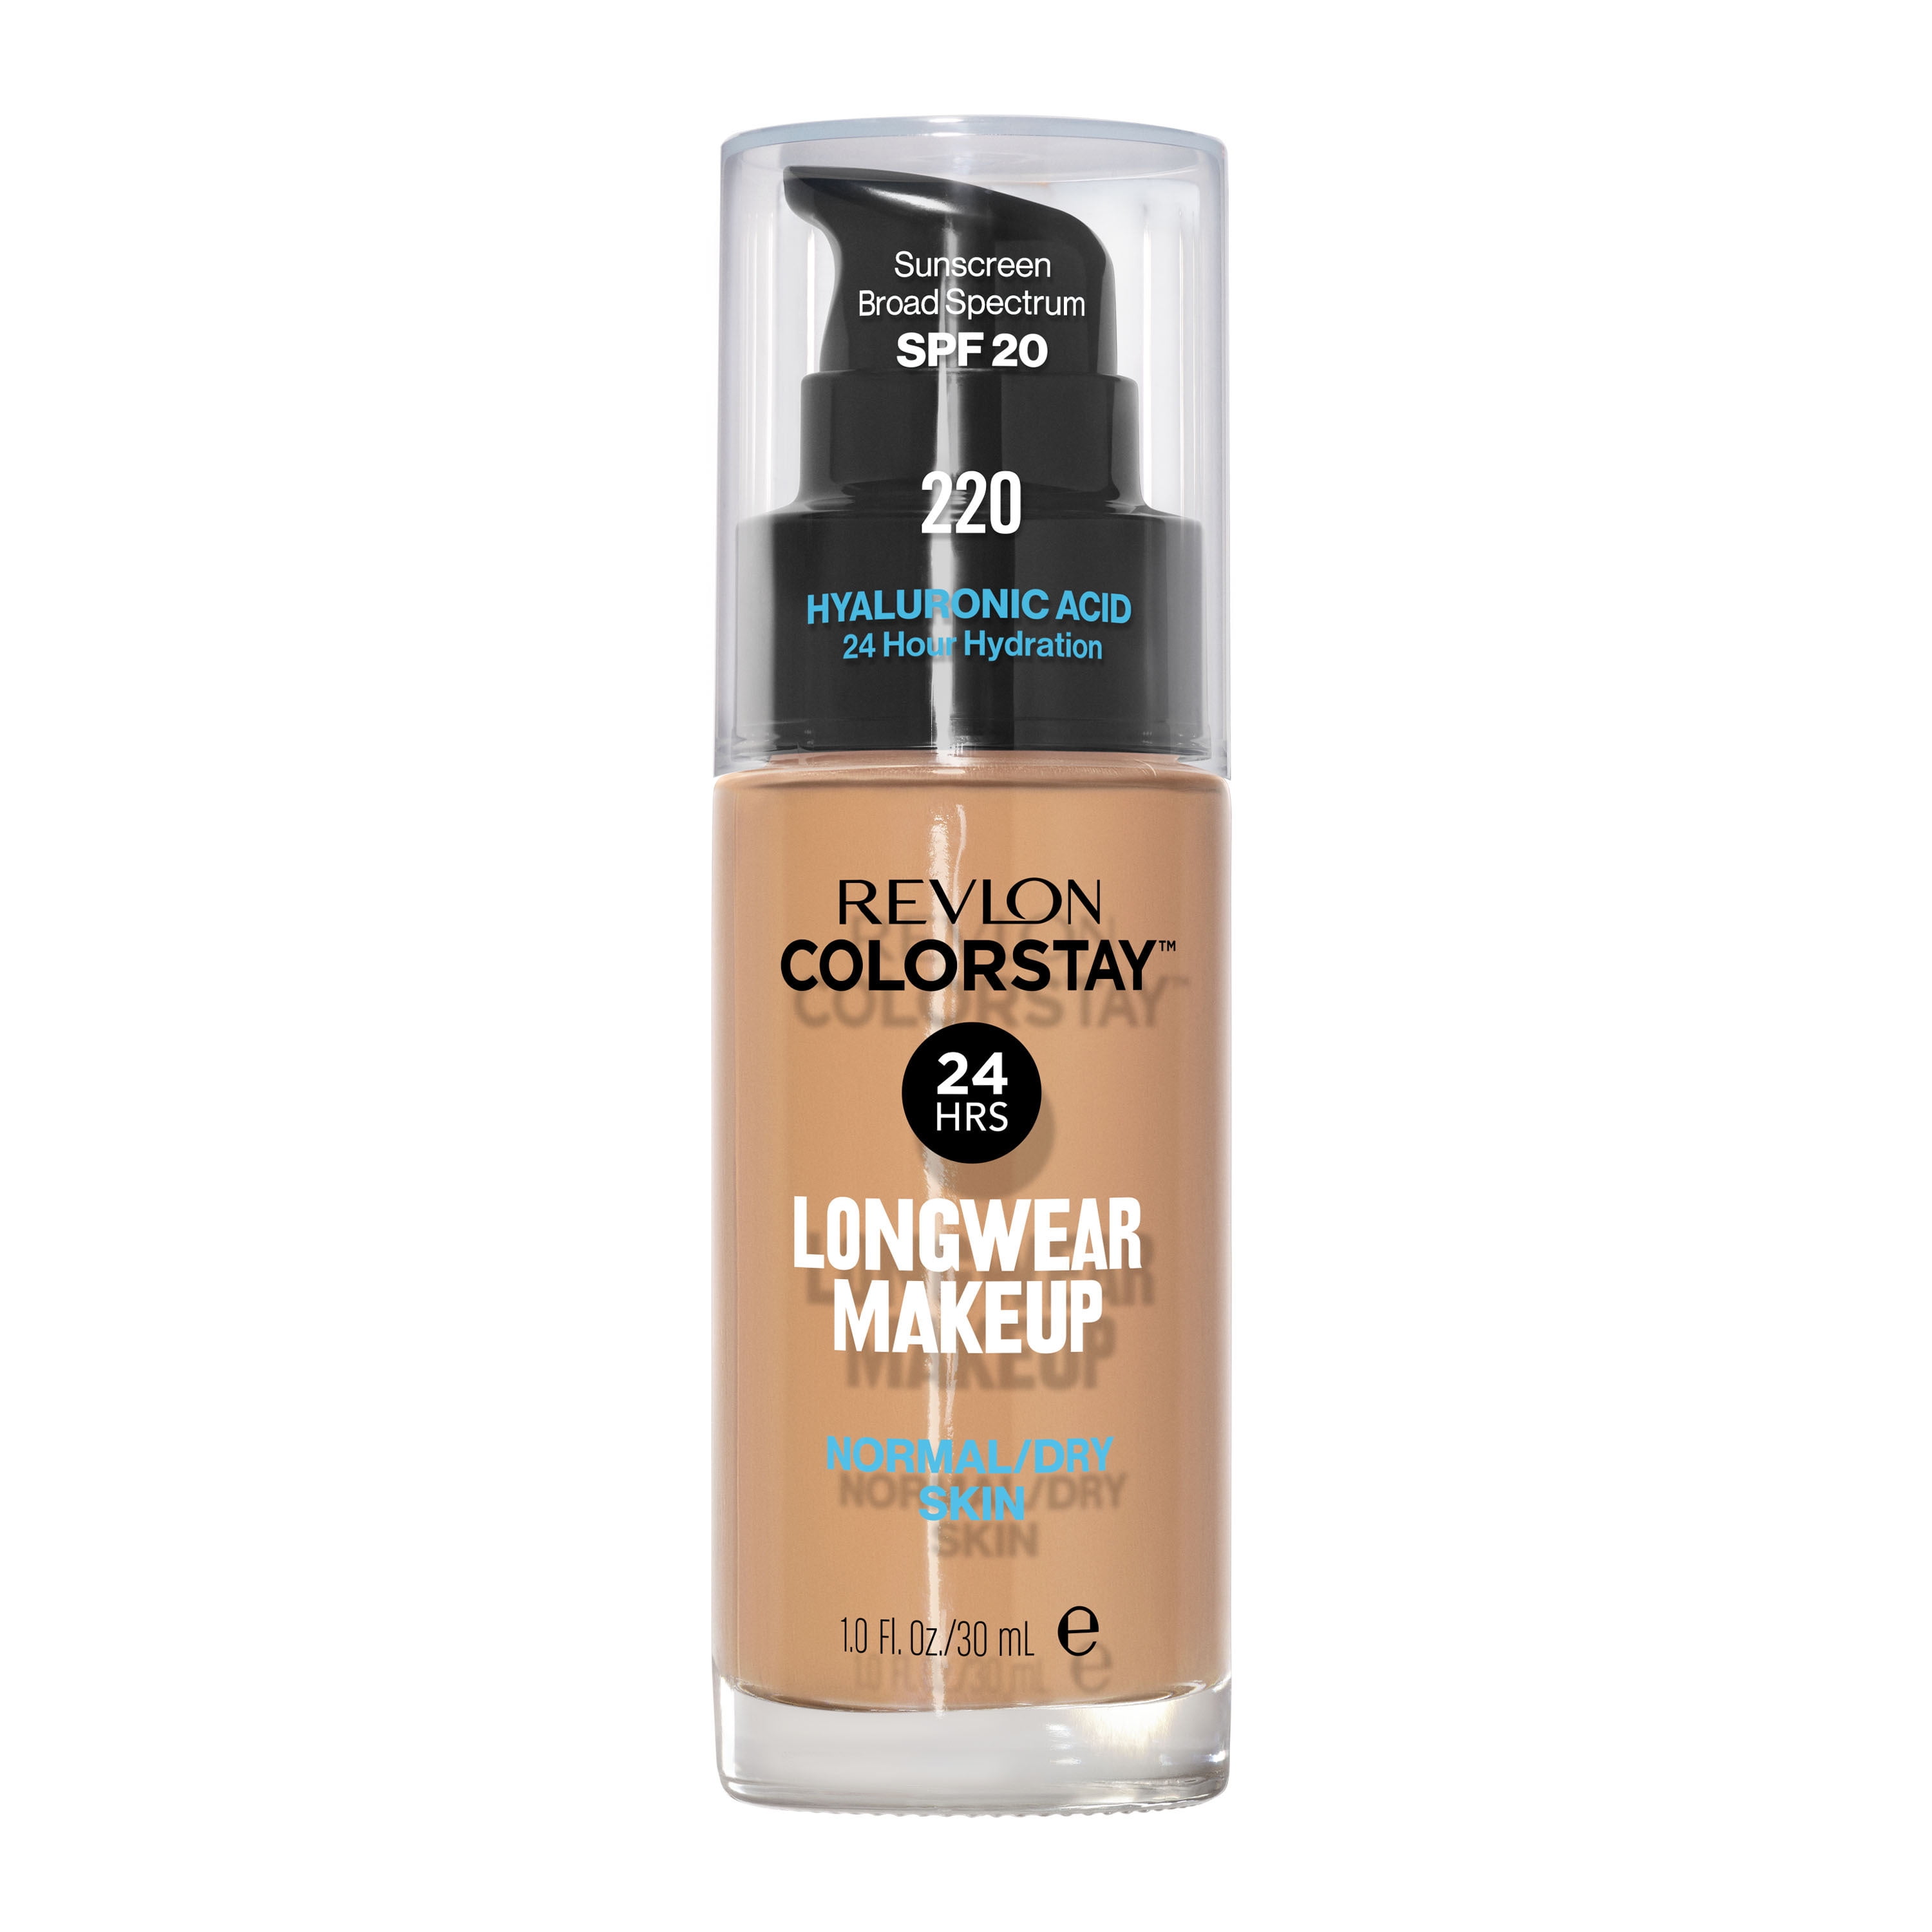 Revlon ColorStay Face Makeup for Normal and Dry Skin, SPF 20, Longwear Medium-Full Coverage with Matte Finish, Oil Free, 220 Natural Beige